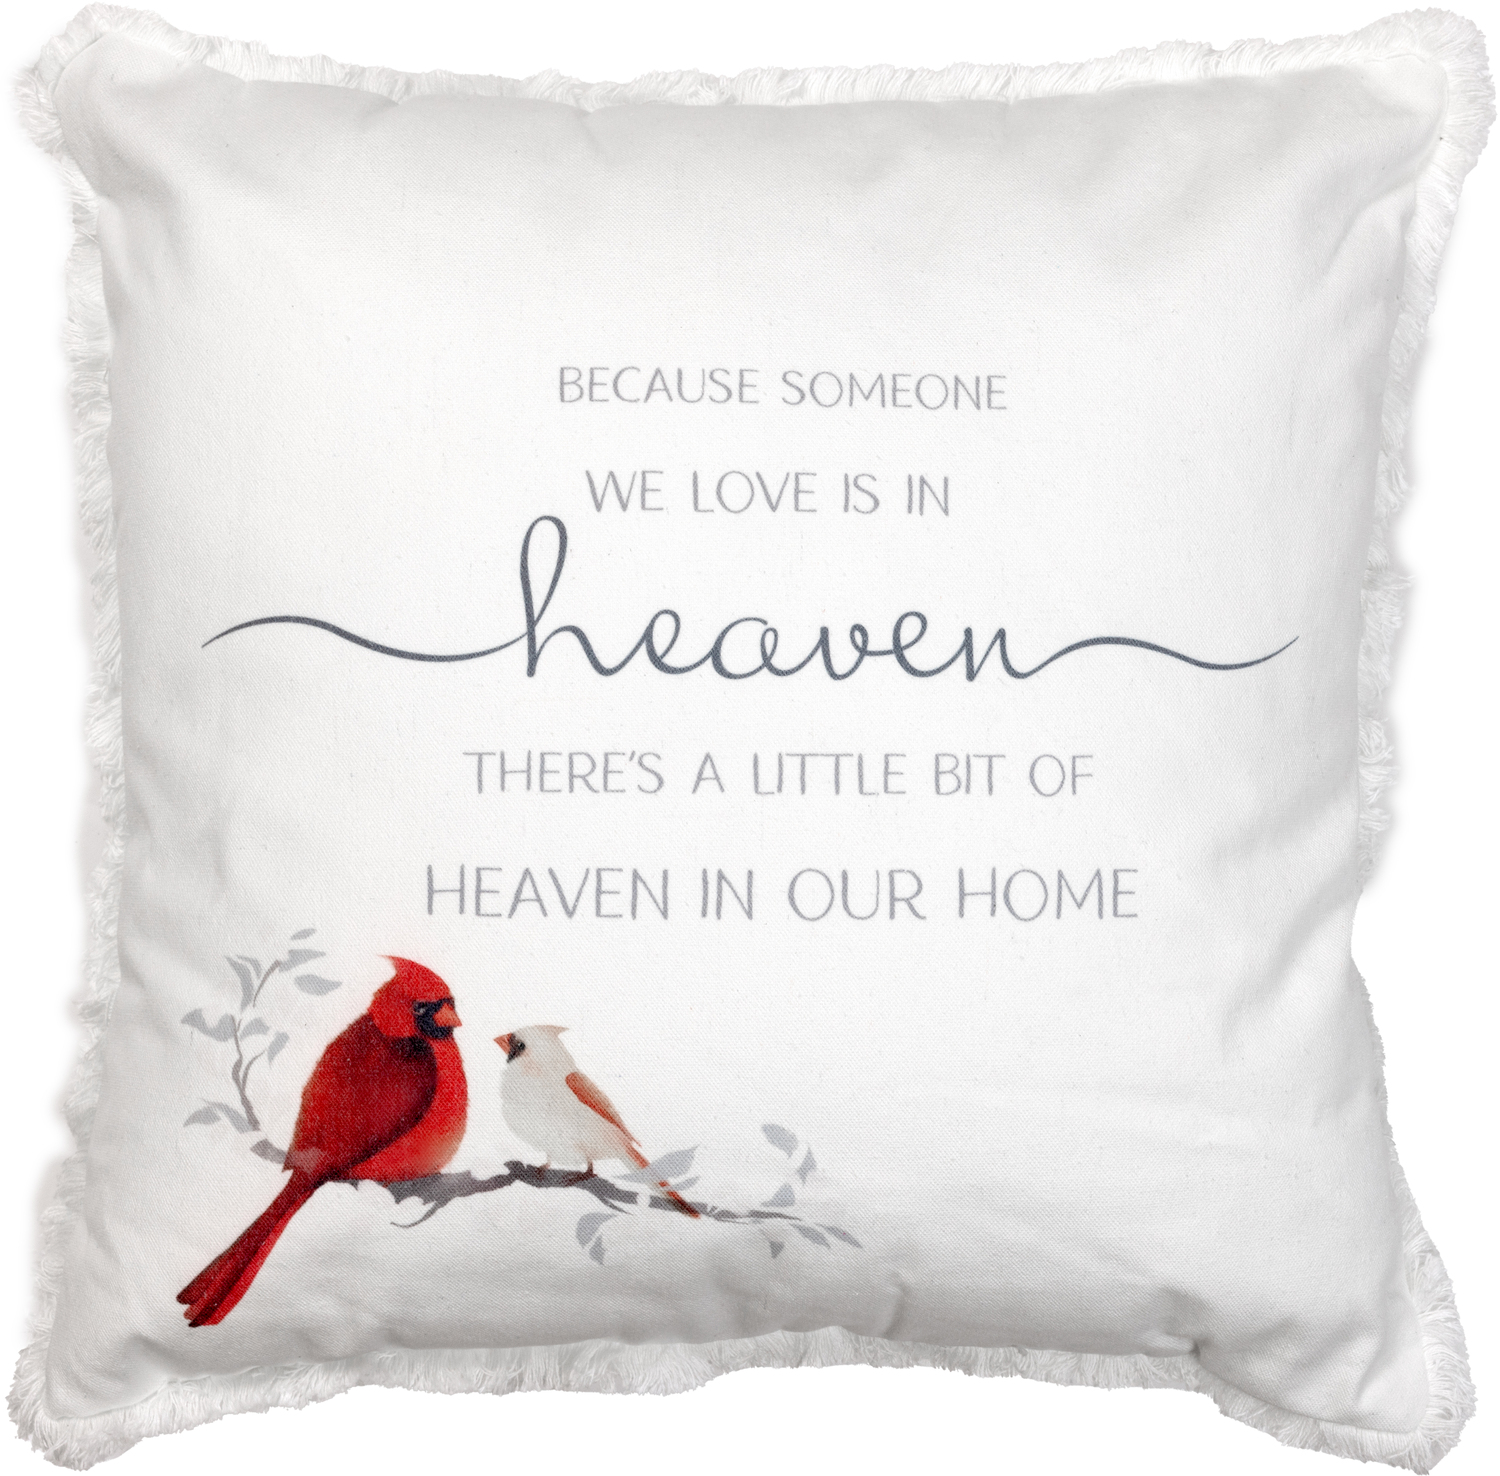 Heaven In Our Home by Always by Your Side - Heaven In Our Home -  18" Square Throw Pillow